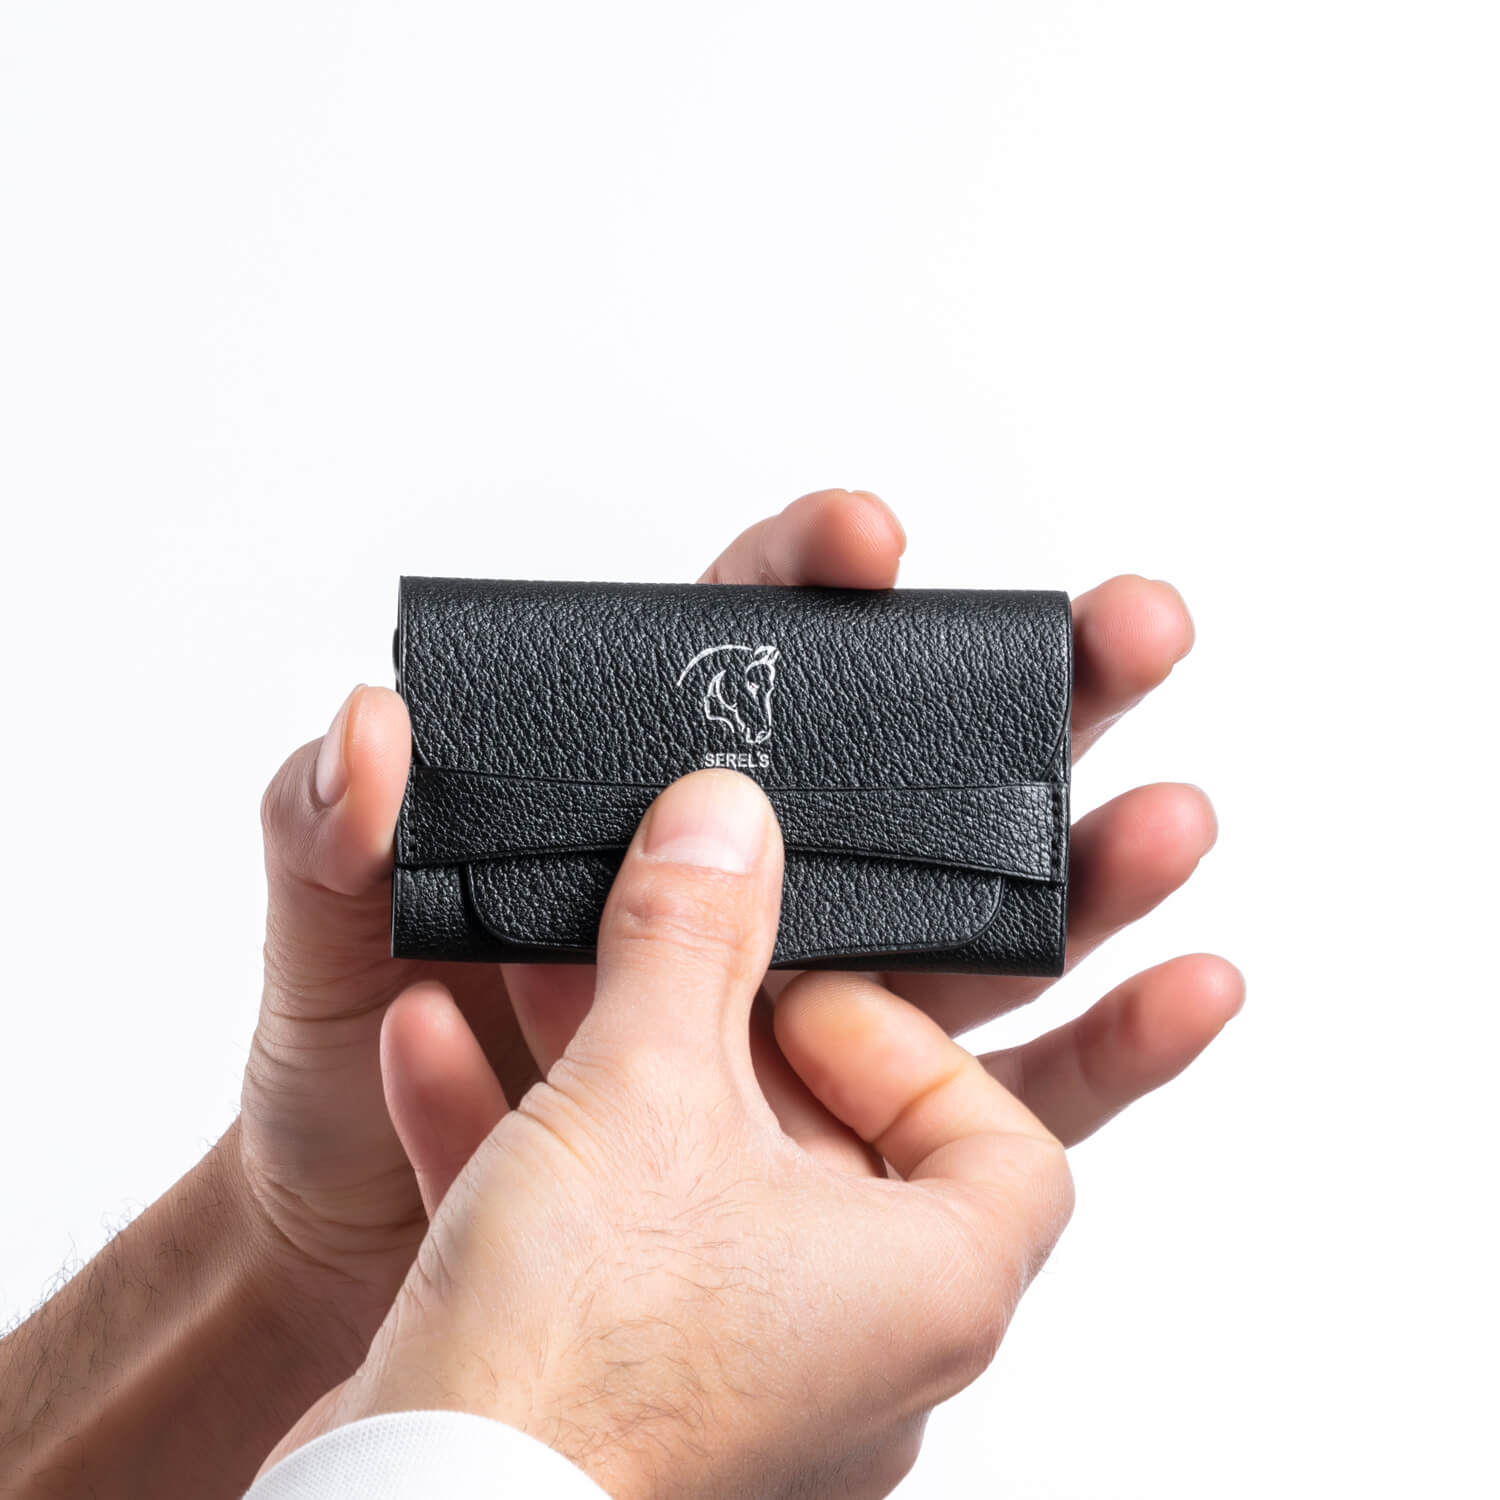 Serel's Natty Business Card Holder is at your fingertips